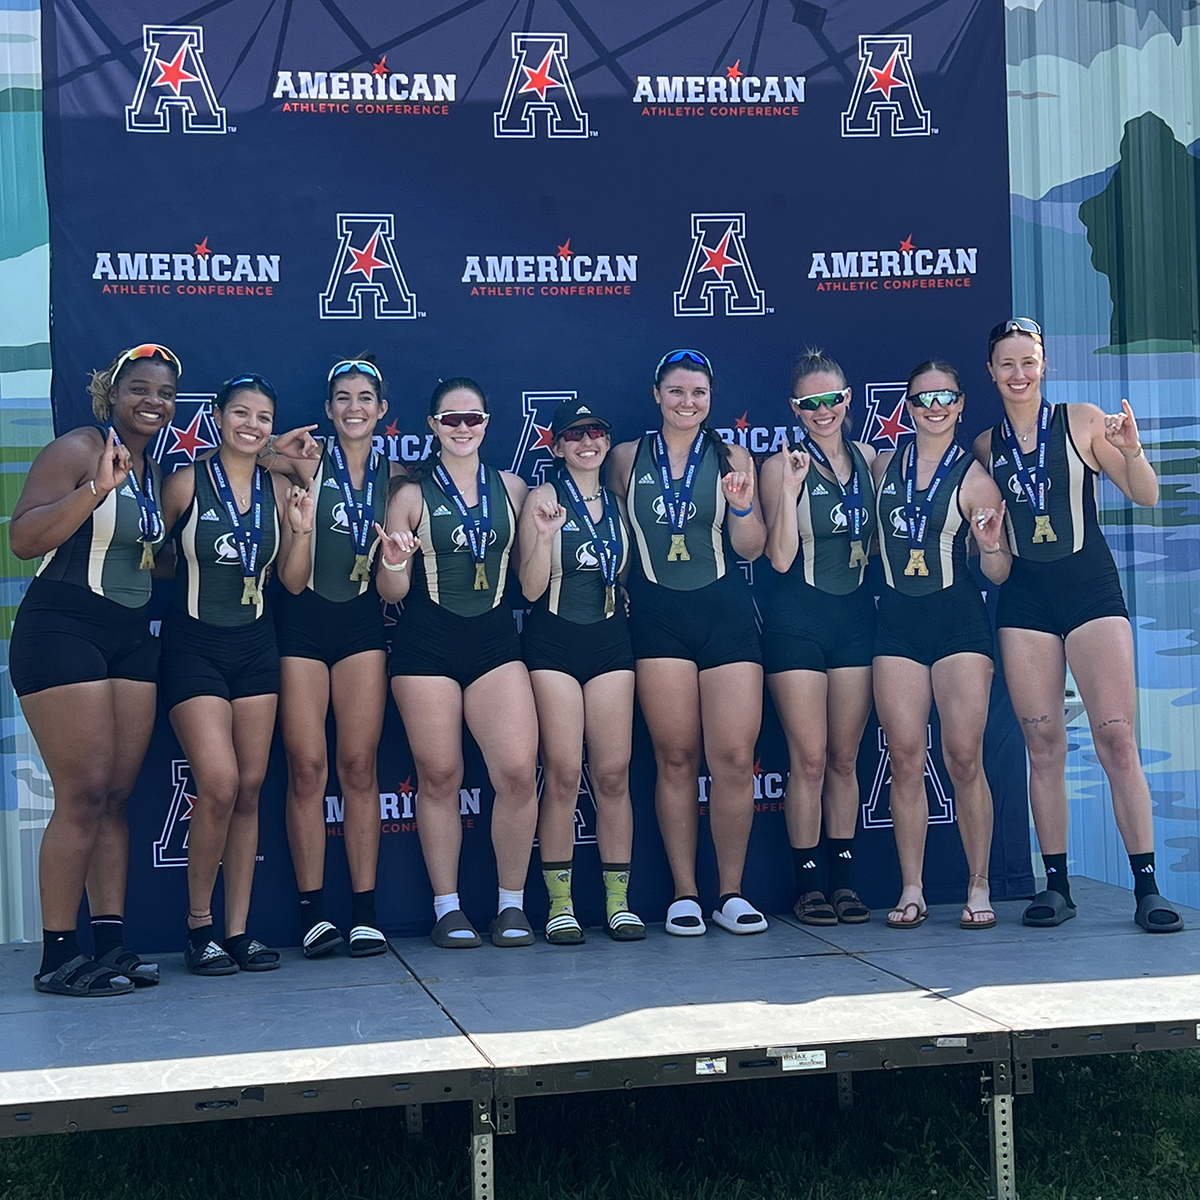 Hornets finish 3rd at the American Rowing Championship! Tied for highest finish in program history! • Most medals (3) as a team since 2015 • V8 wins bronze, 1st medal since 2017 • 2V8 wins bronze, 1st medal since 2021 • V4 wins silver, highest finish since 2015 #StingersUp